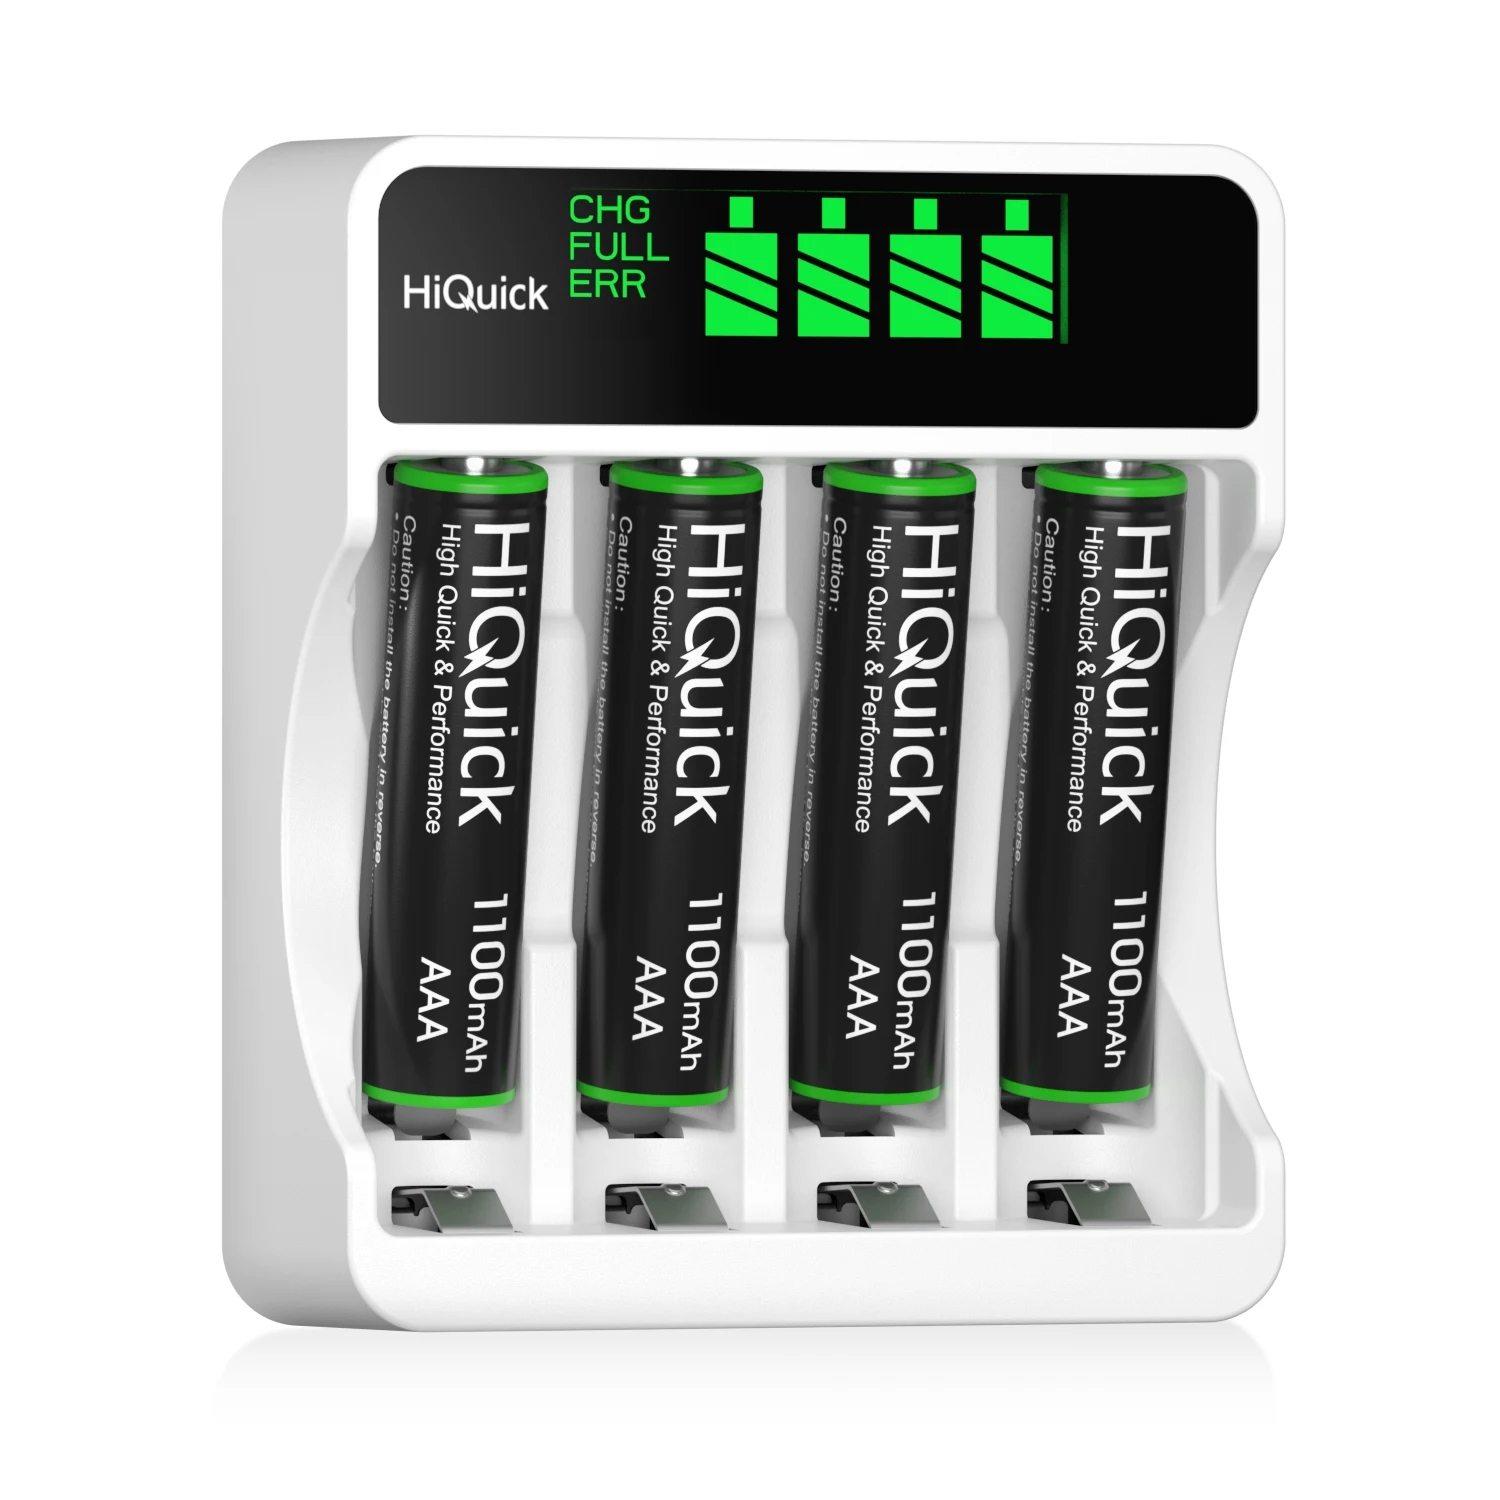 

New 4 Slots Battery Charge Display AA AAA 1.2v Battery Charger With 1100mAh NiMh Batteries